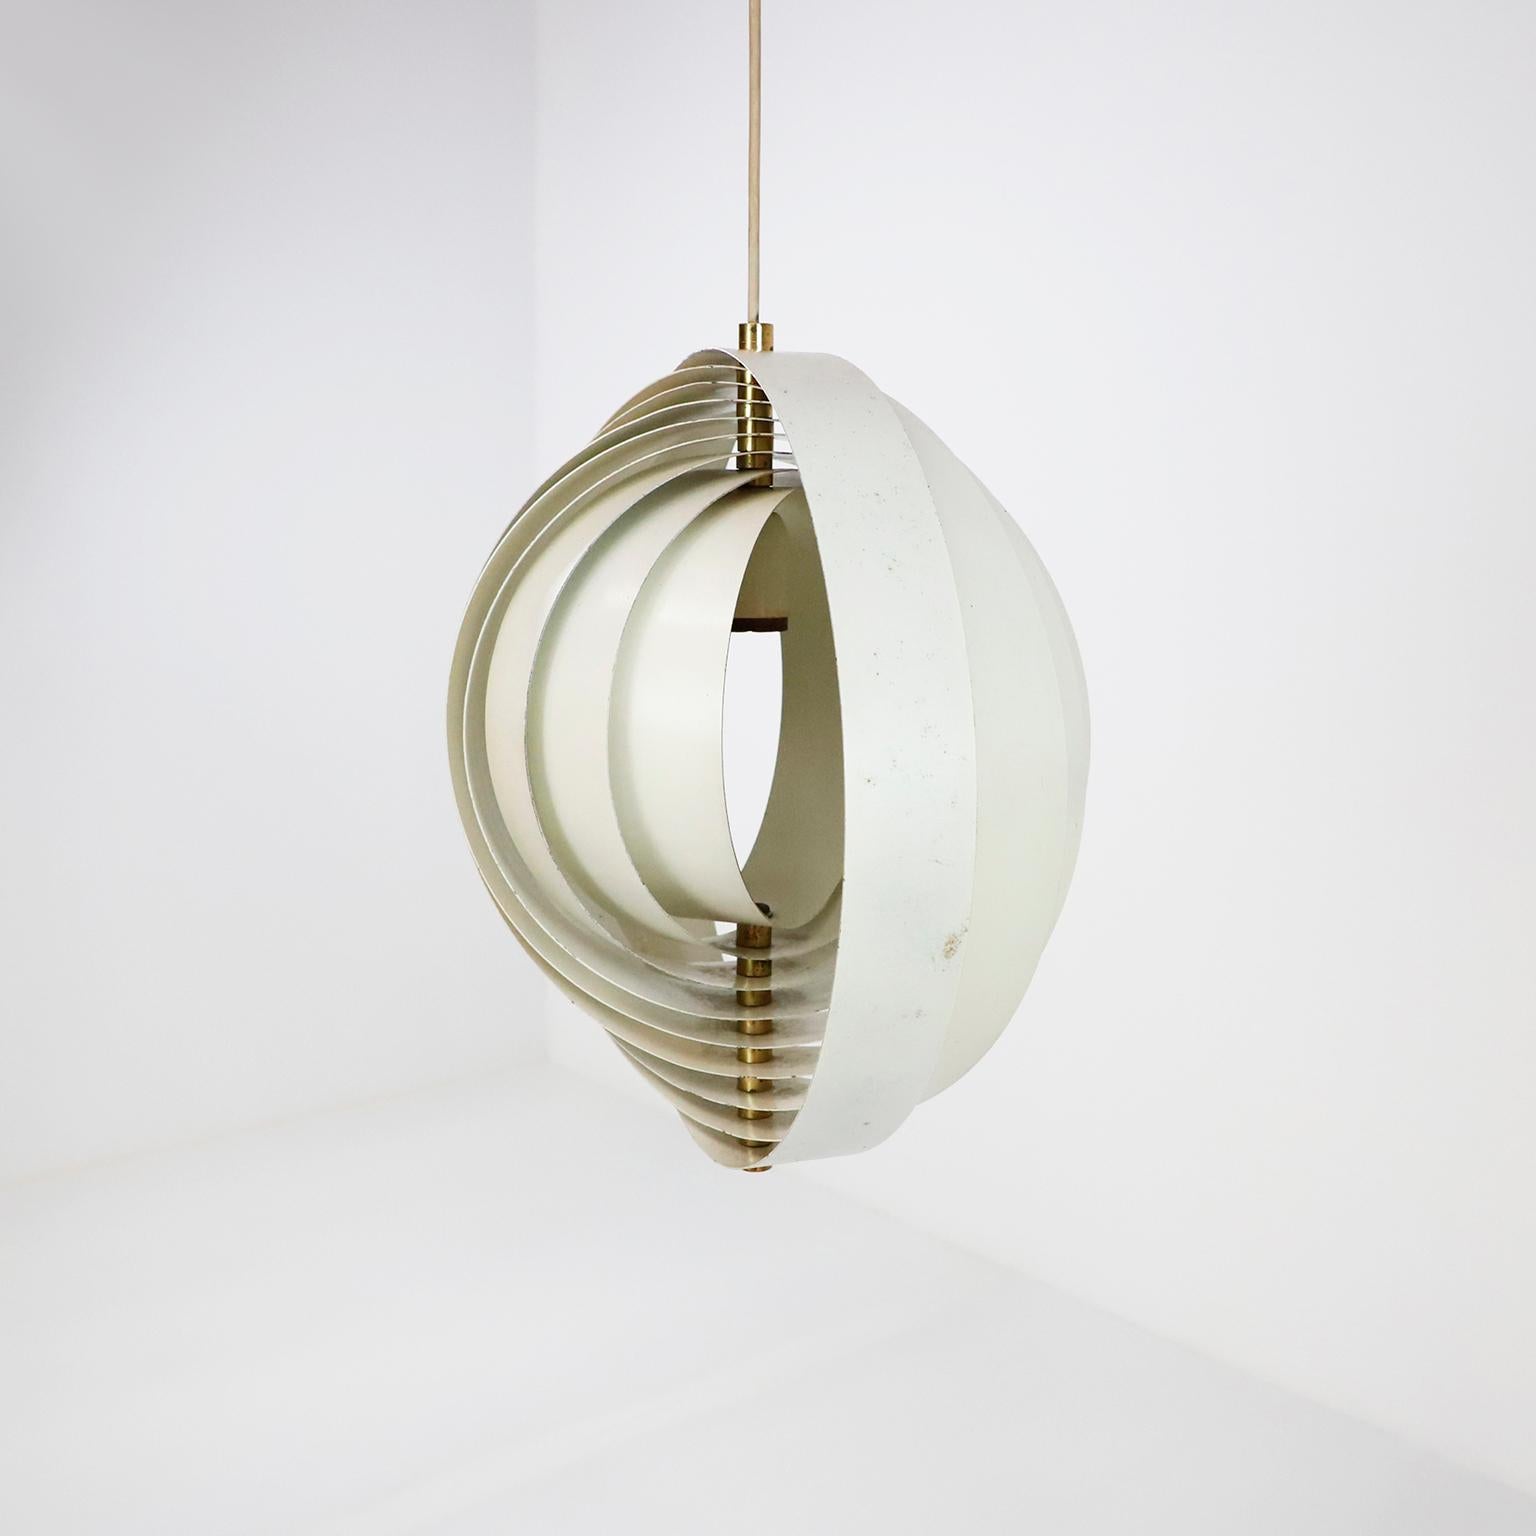 Lacquered metal version of the Panton moon lamp from the 1960s. Produced by Louis Poulsen. Fully adjustable. Beautiful example with original ceiling cap and fantastic patina.